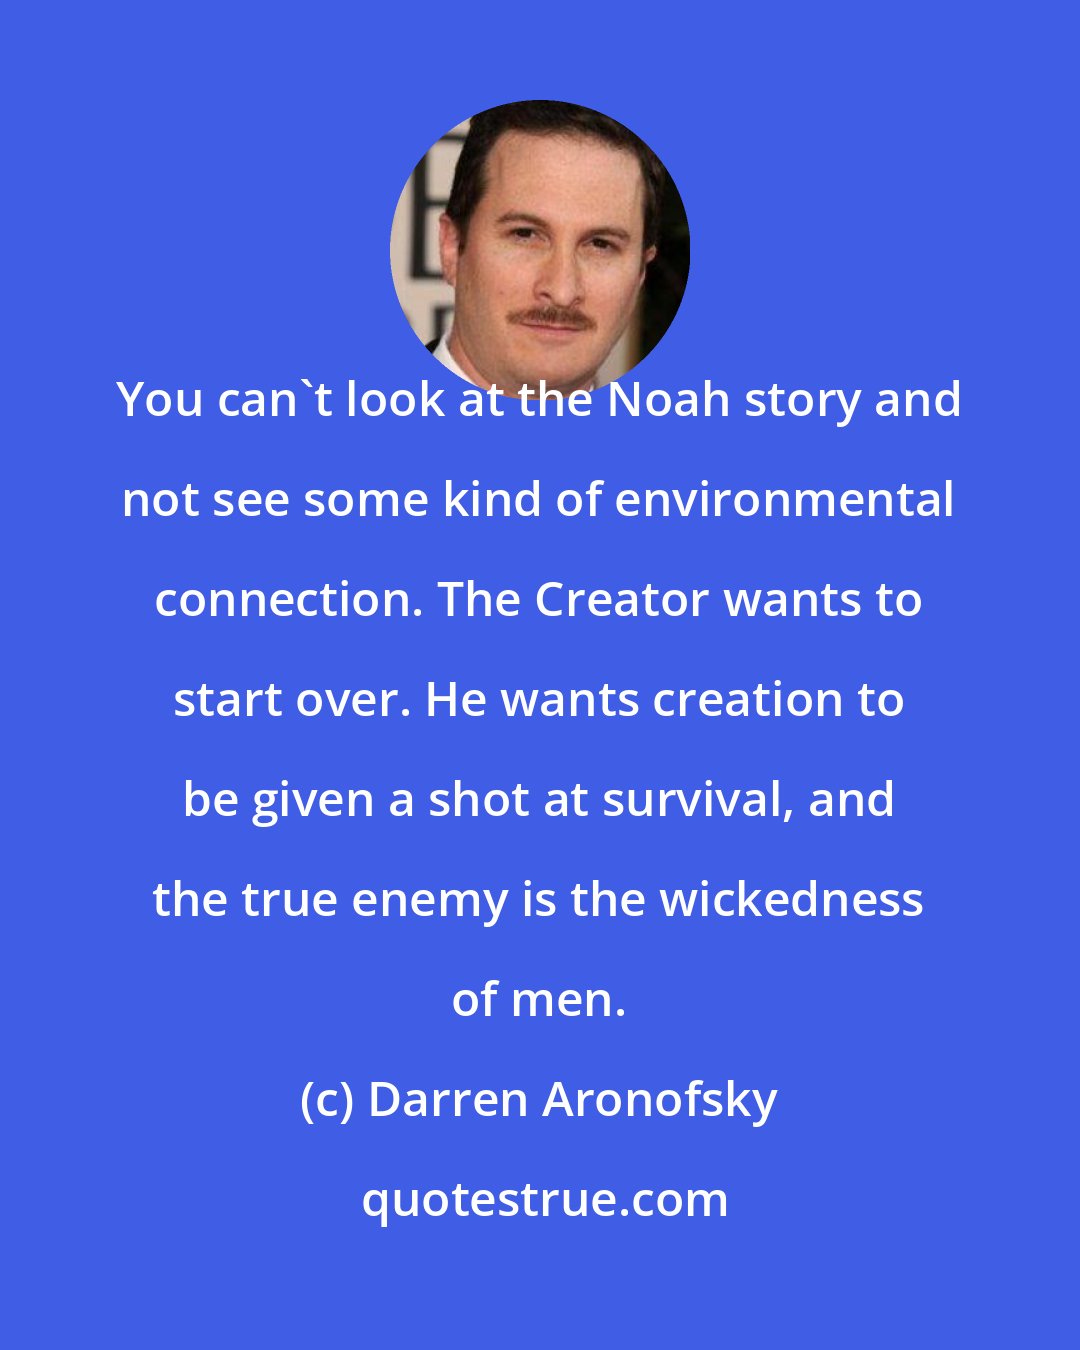 Darren Aronofsky: You can't look at the Noah story and not see some kind of environmental connection. The Creator wants to start over. He wants creation to be given a shot at survival, and the true enemy is the wickedness of men.